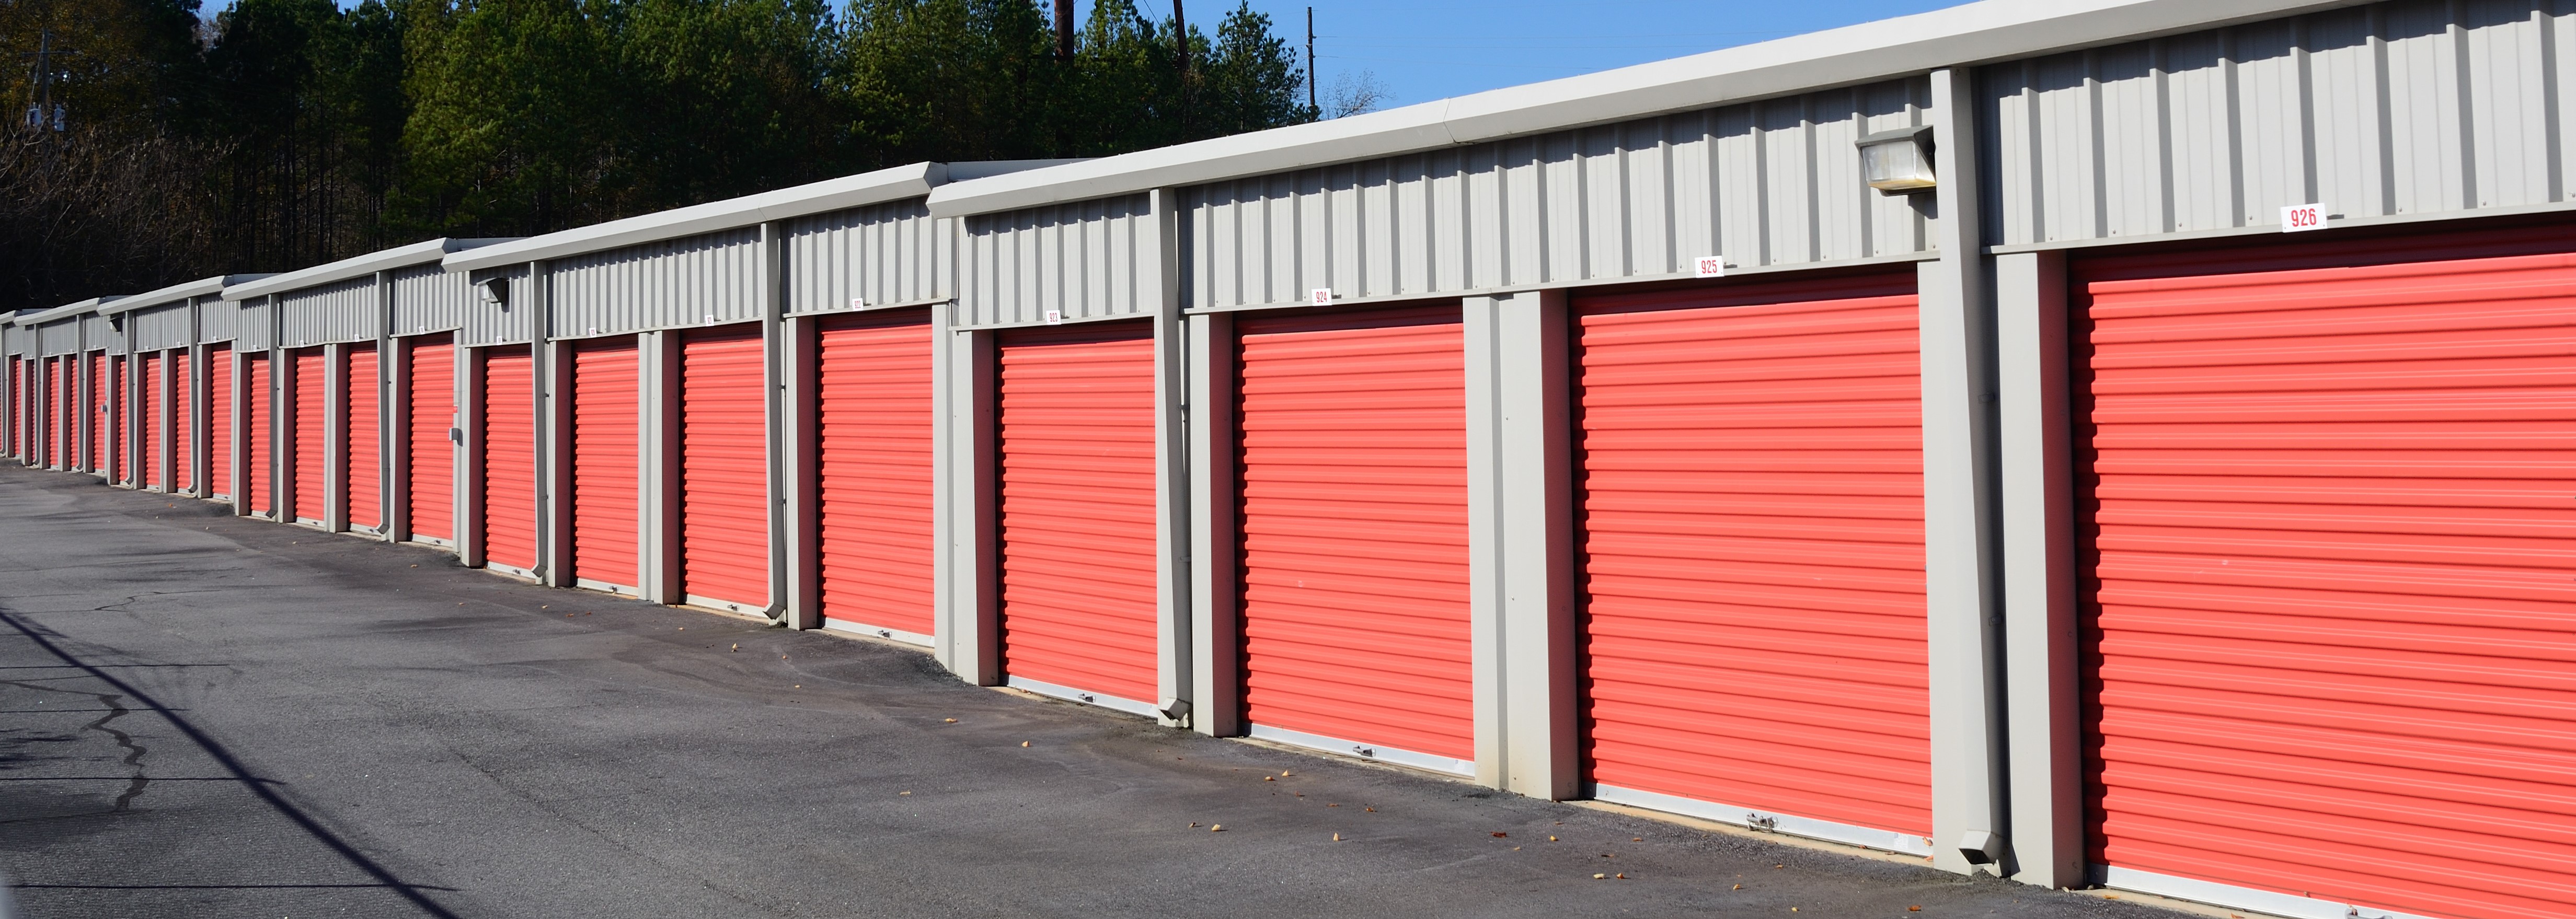 Storage Wise of Angier Drive-Up Access Units in Angier, NC